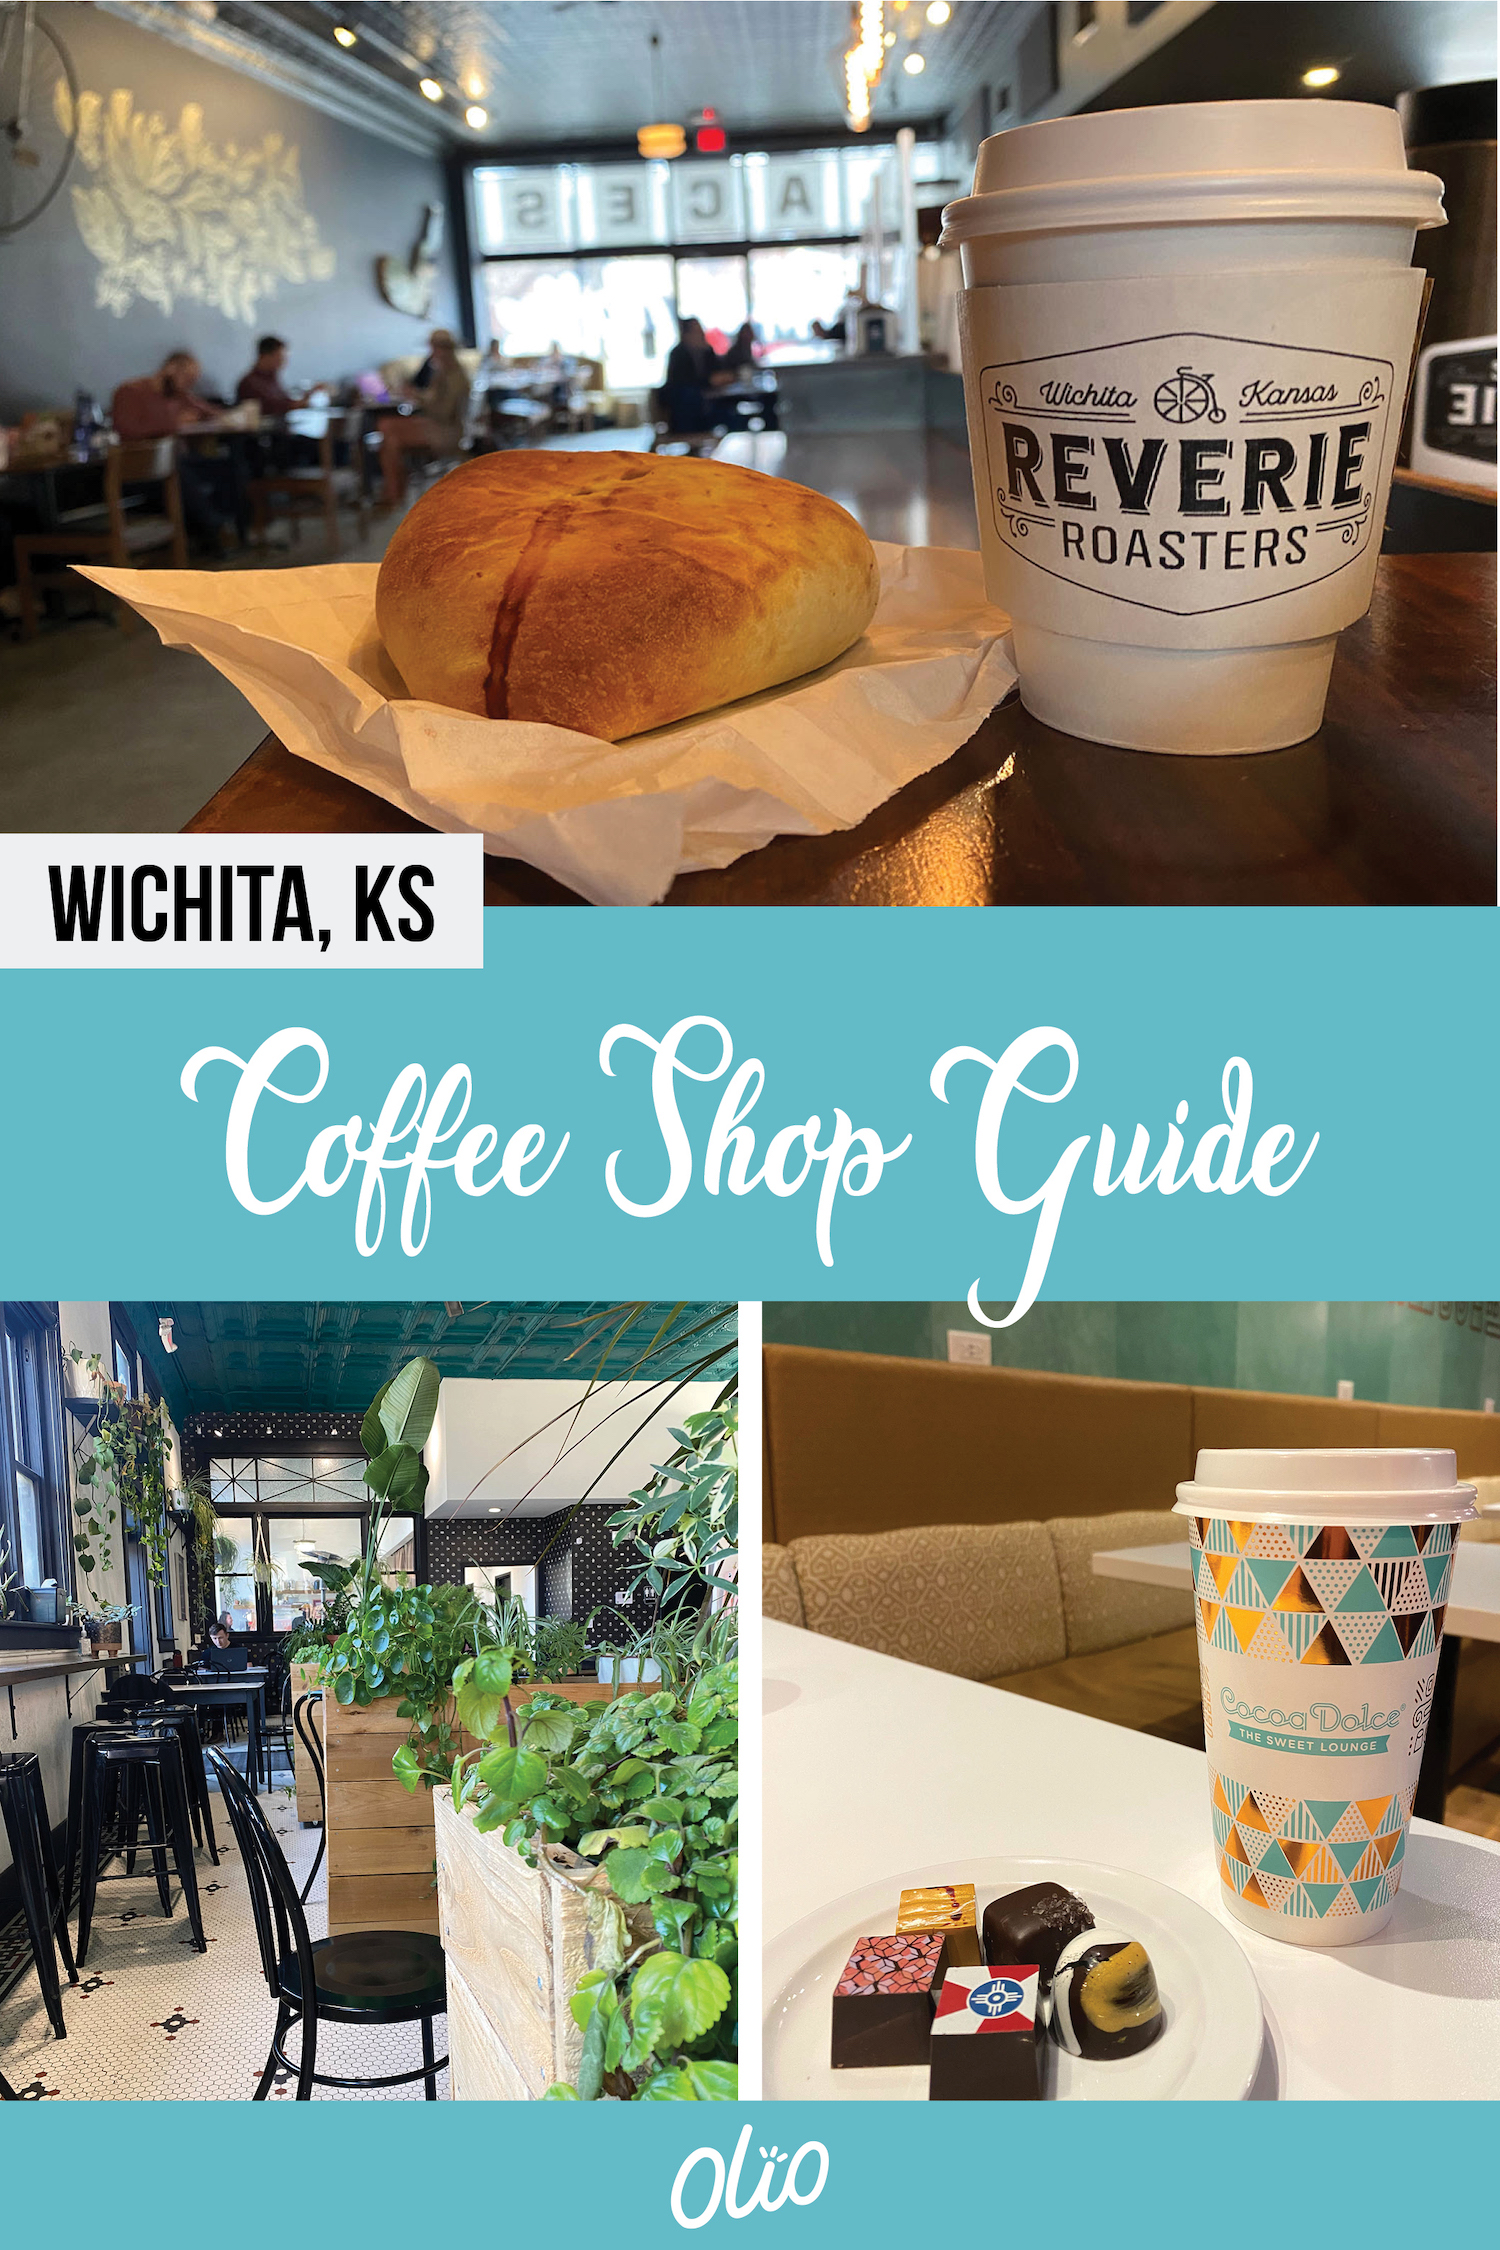 In search of coffee shops in Wichita, Kansas? No sweat! This guide to Wichita coffee shops includes places to grab a coffee across the metro including places to find coffee beans to brew at home. Coffee lovers won't want to miss out on Wichita's growing coffee shop culture. #Wichita #Kansas #foodie #CoffeeShop